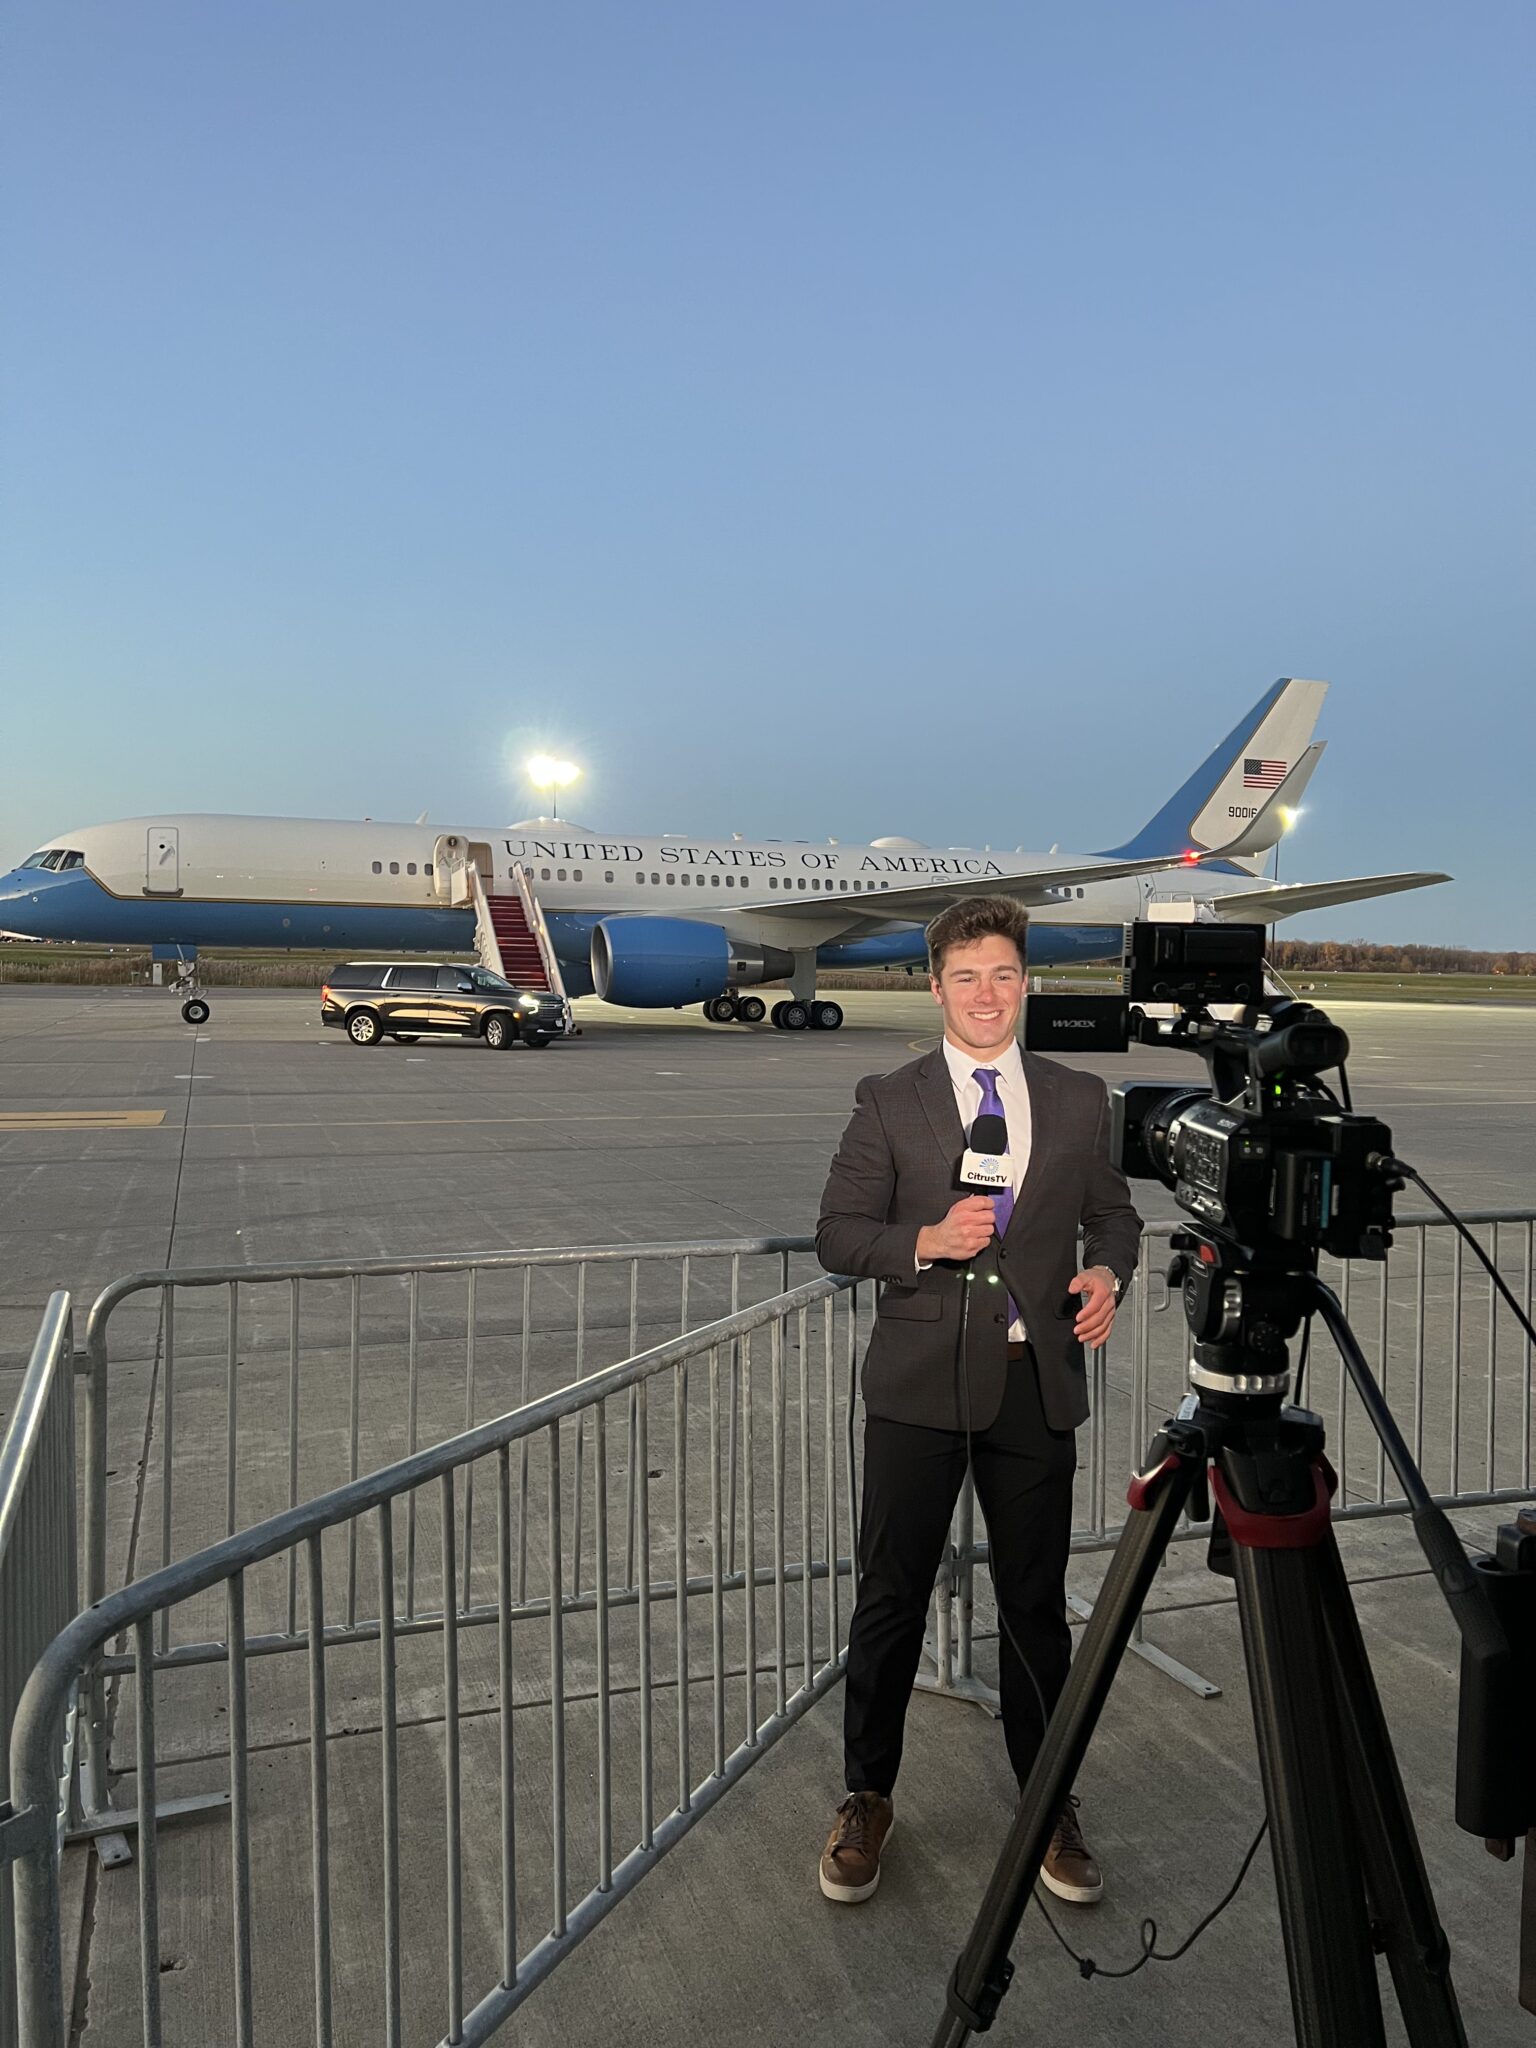 A reporter stands on a tarmac, reporting on Air Force One